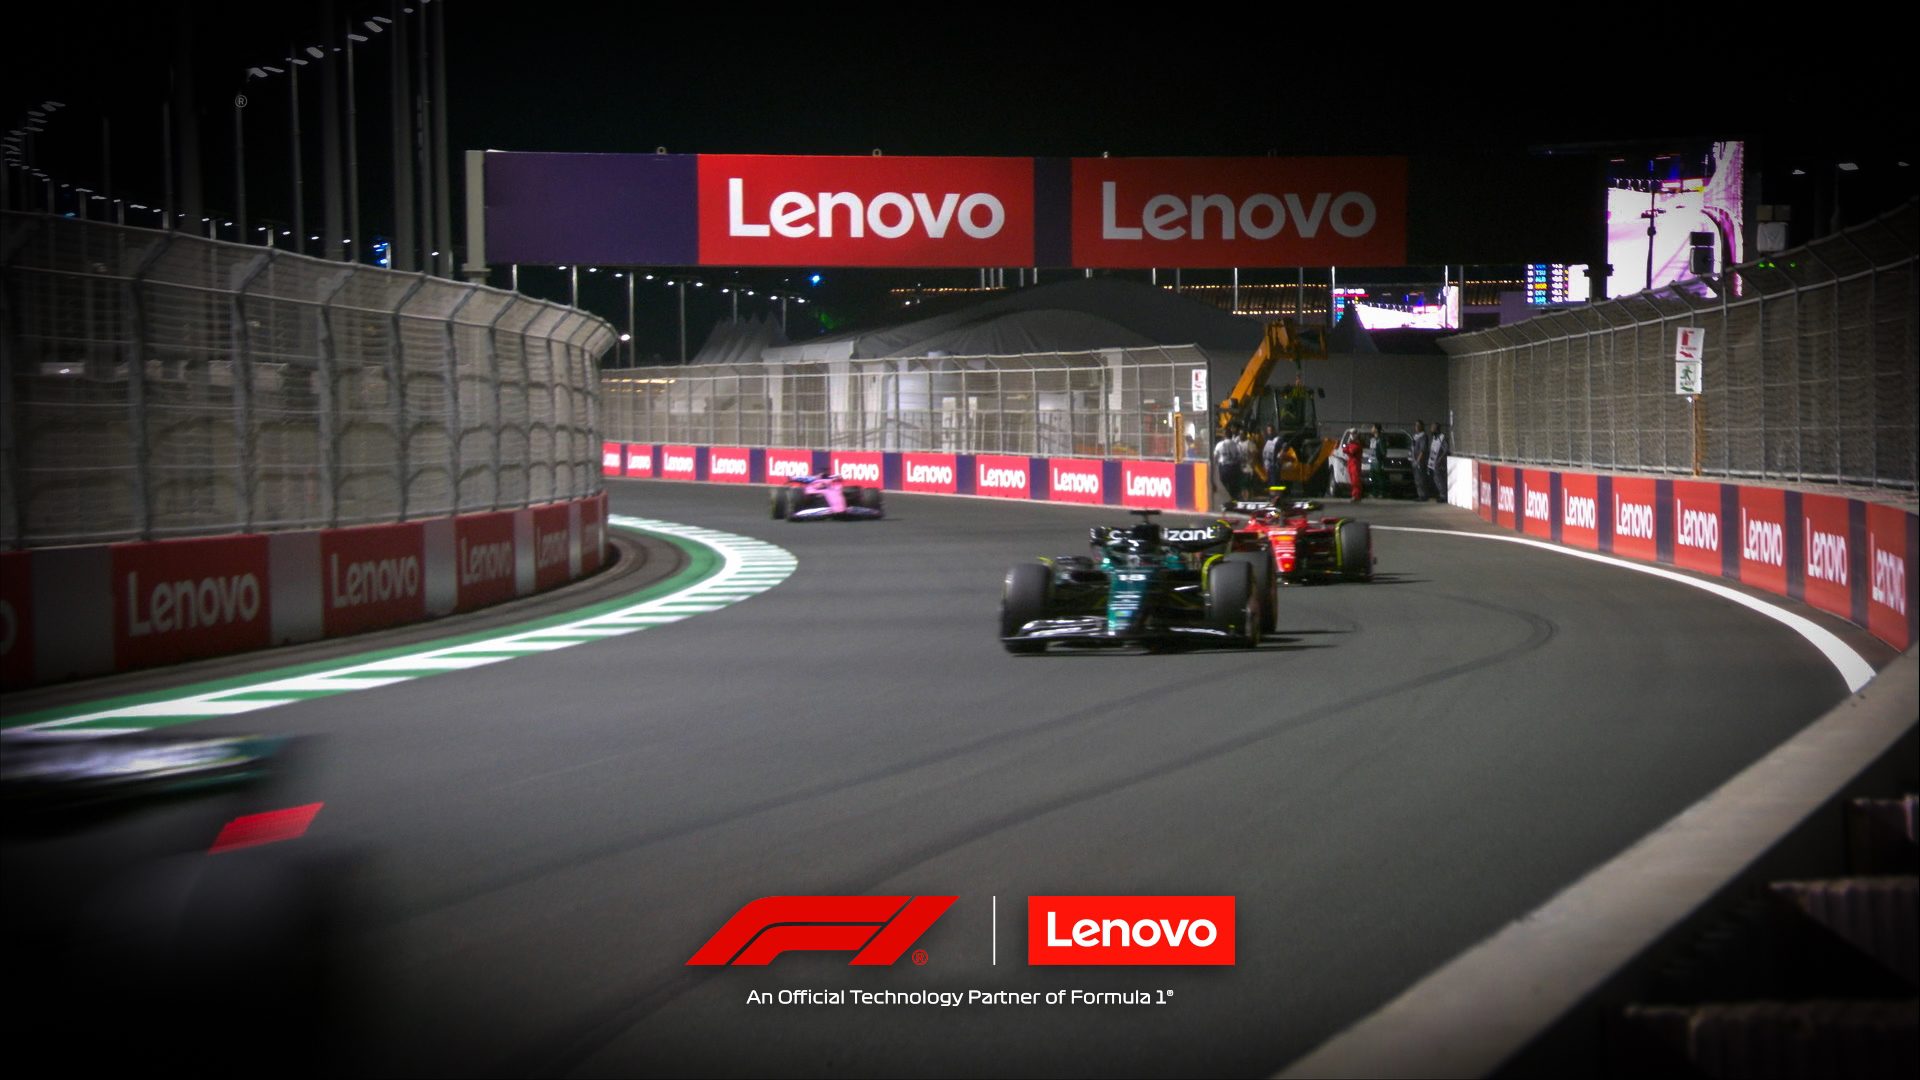 Formula 1® is using Lenovo technology to build a faster, smarter, and more sustainable sport